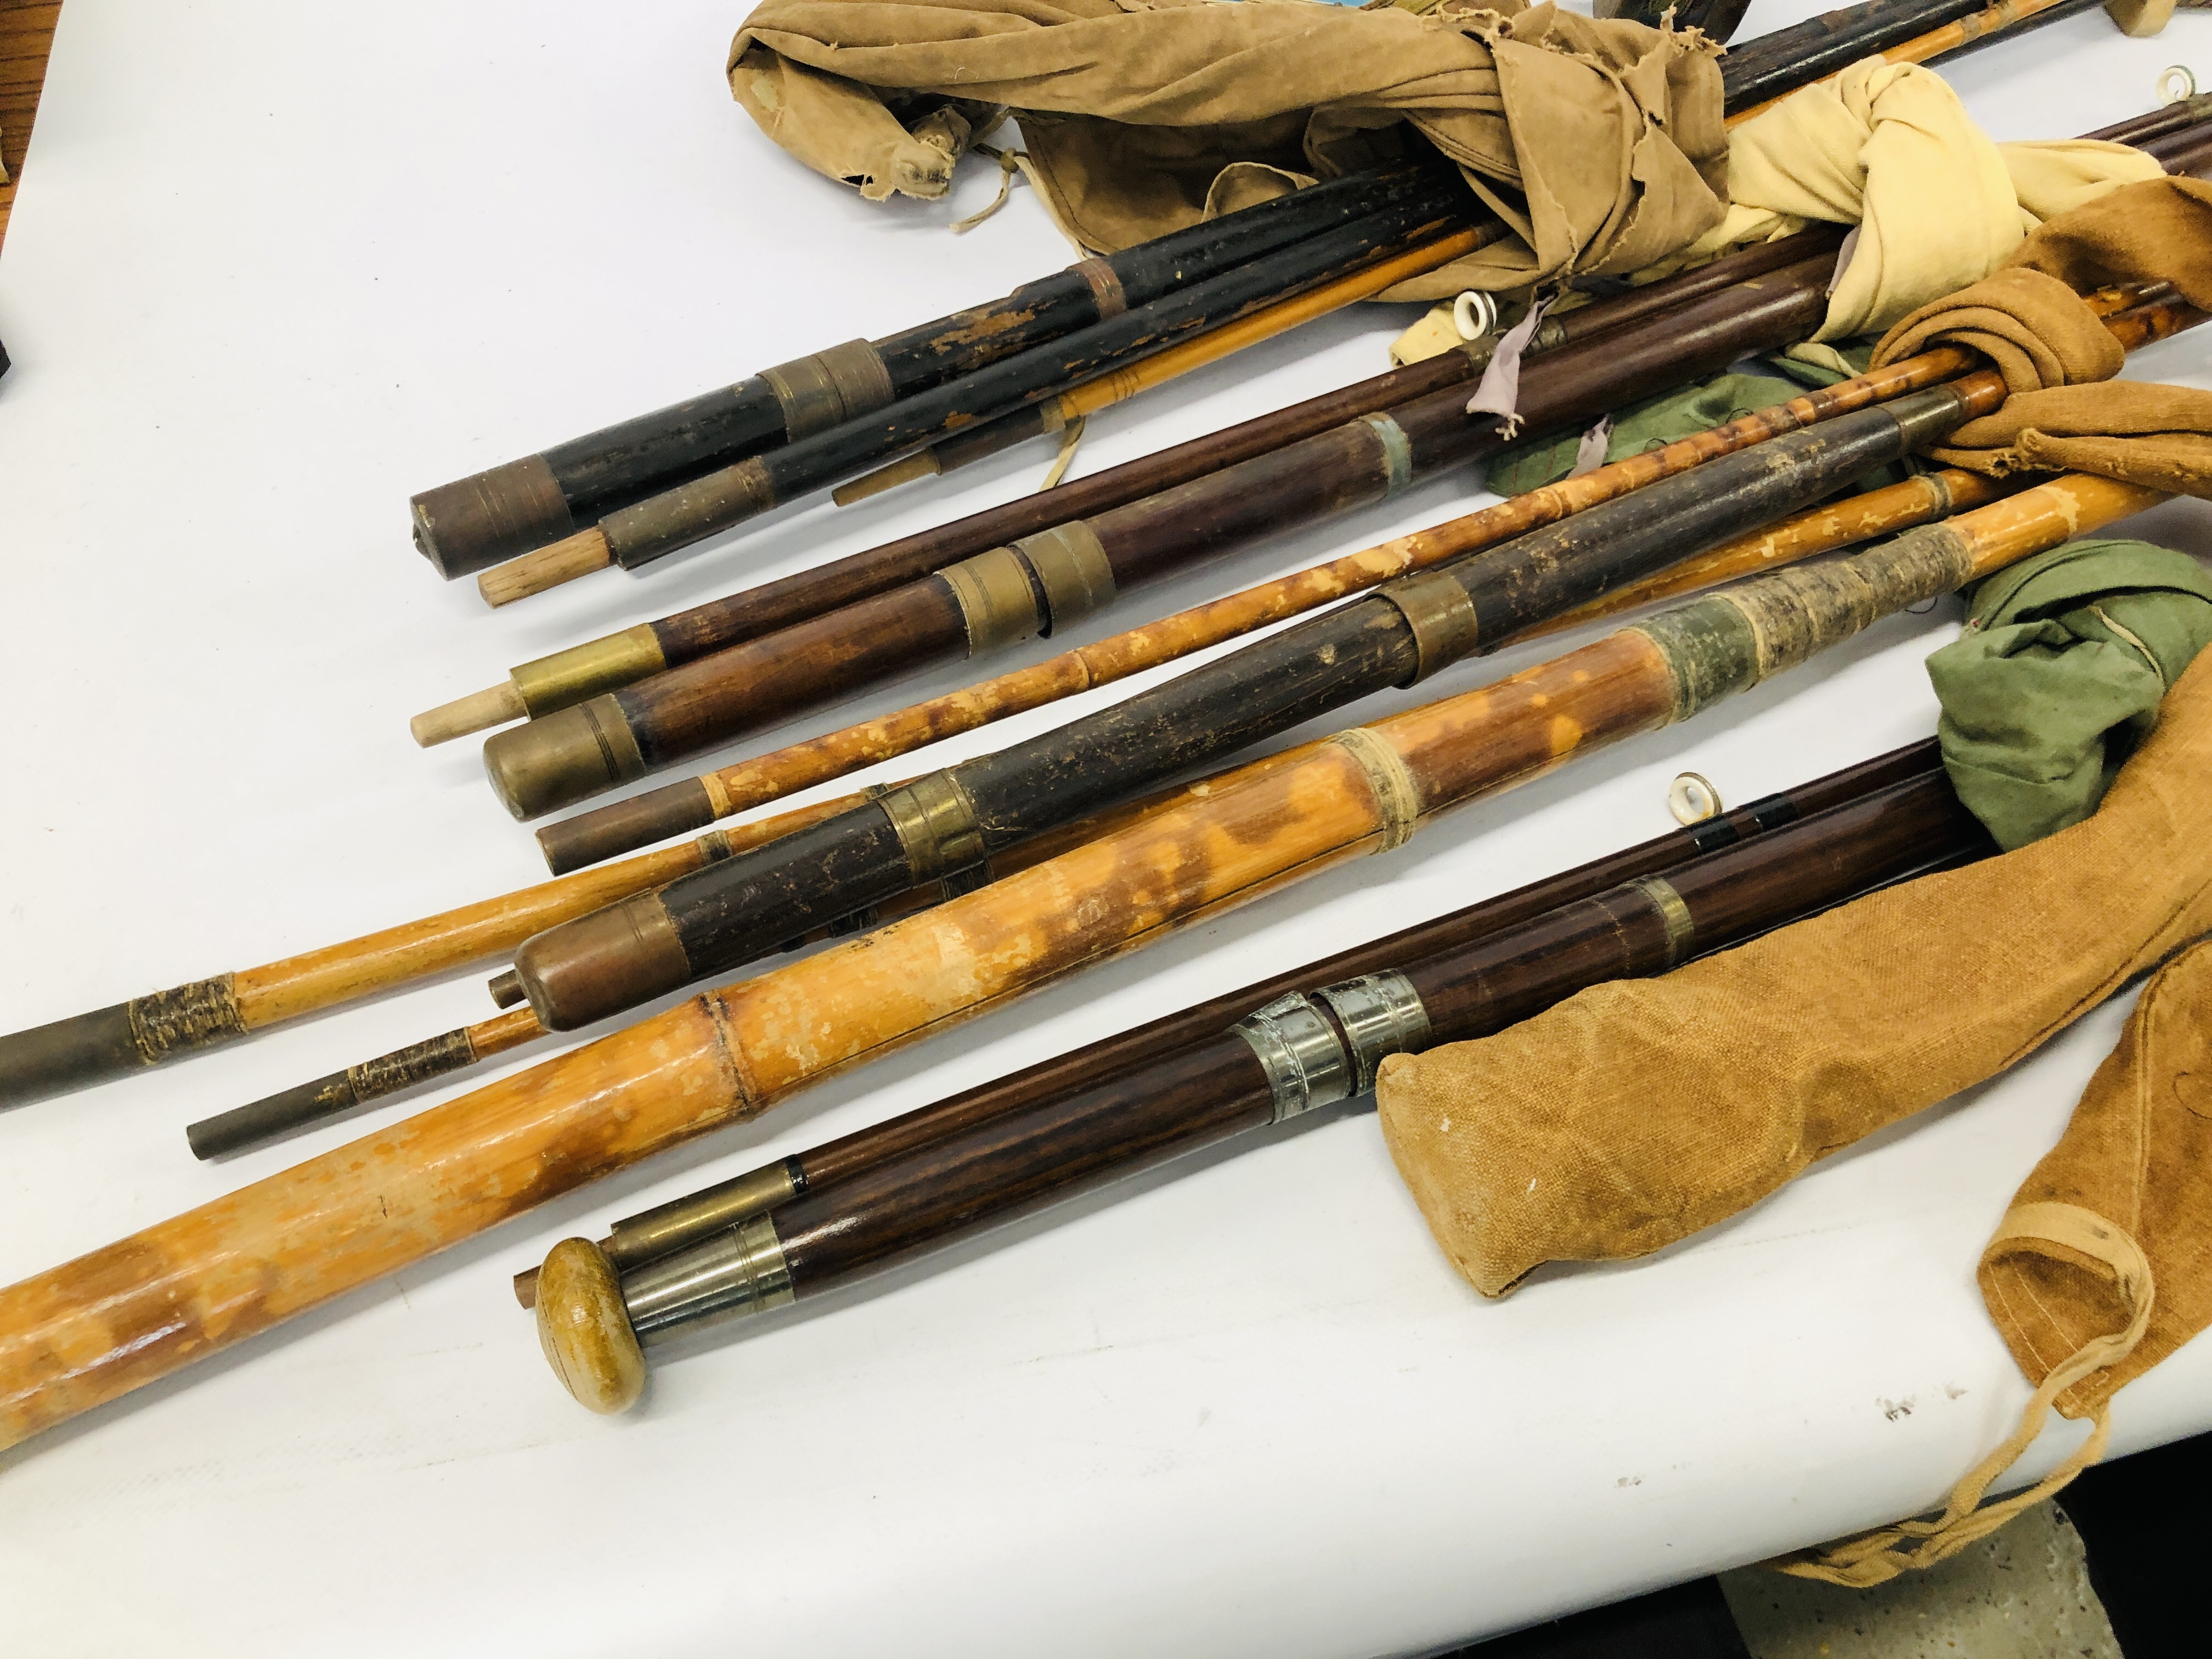 COLLECTION OF 5 X VINTAGE FISHING RODS + BOX OF ASSORTED VINTAGE FISHING REELS AND ACCESSORIES, - Image 8 of 10